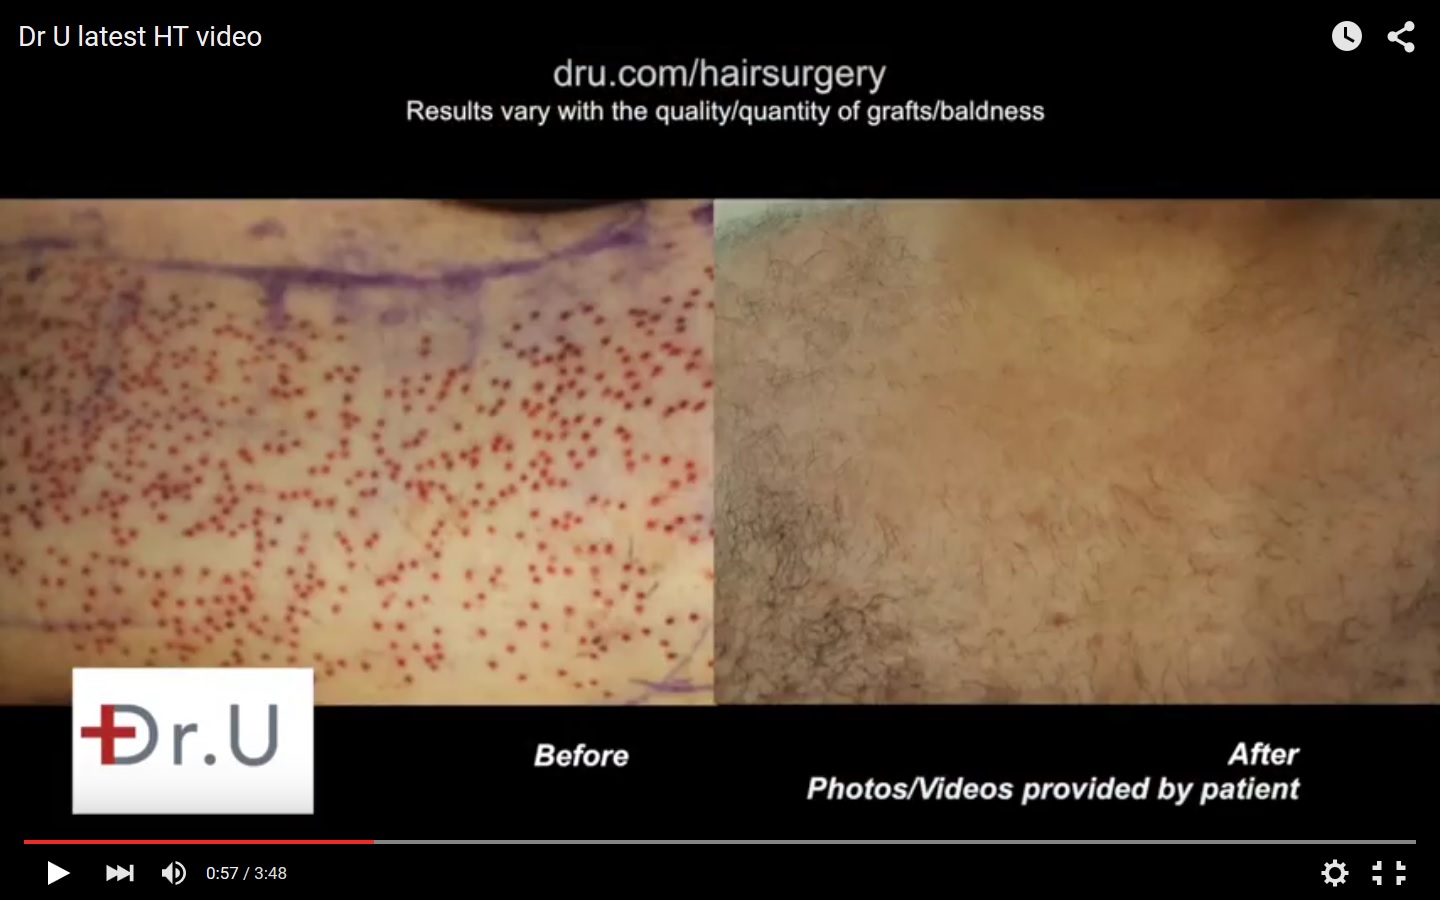 Wound healing after hair restoration. Chest hair extraction wound healing by Dr U